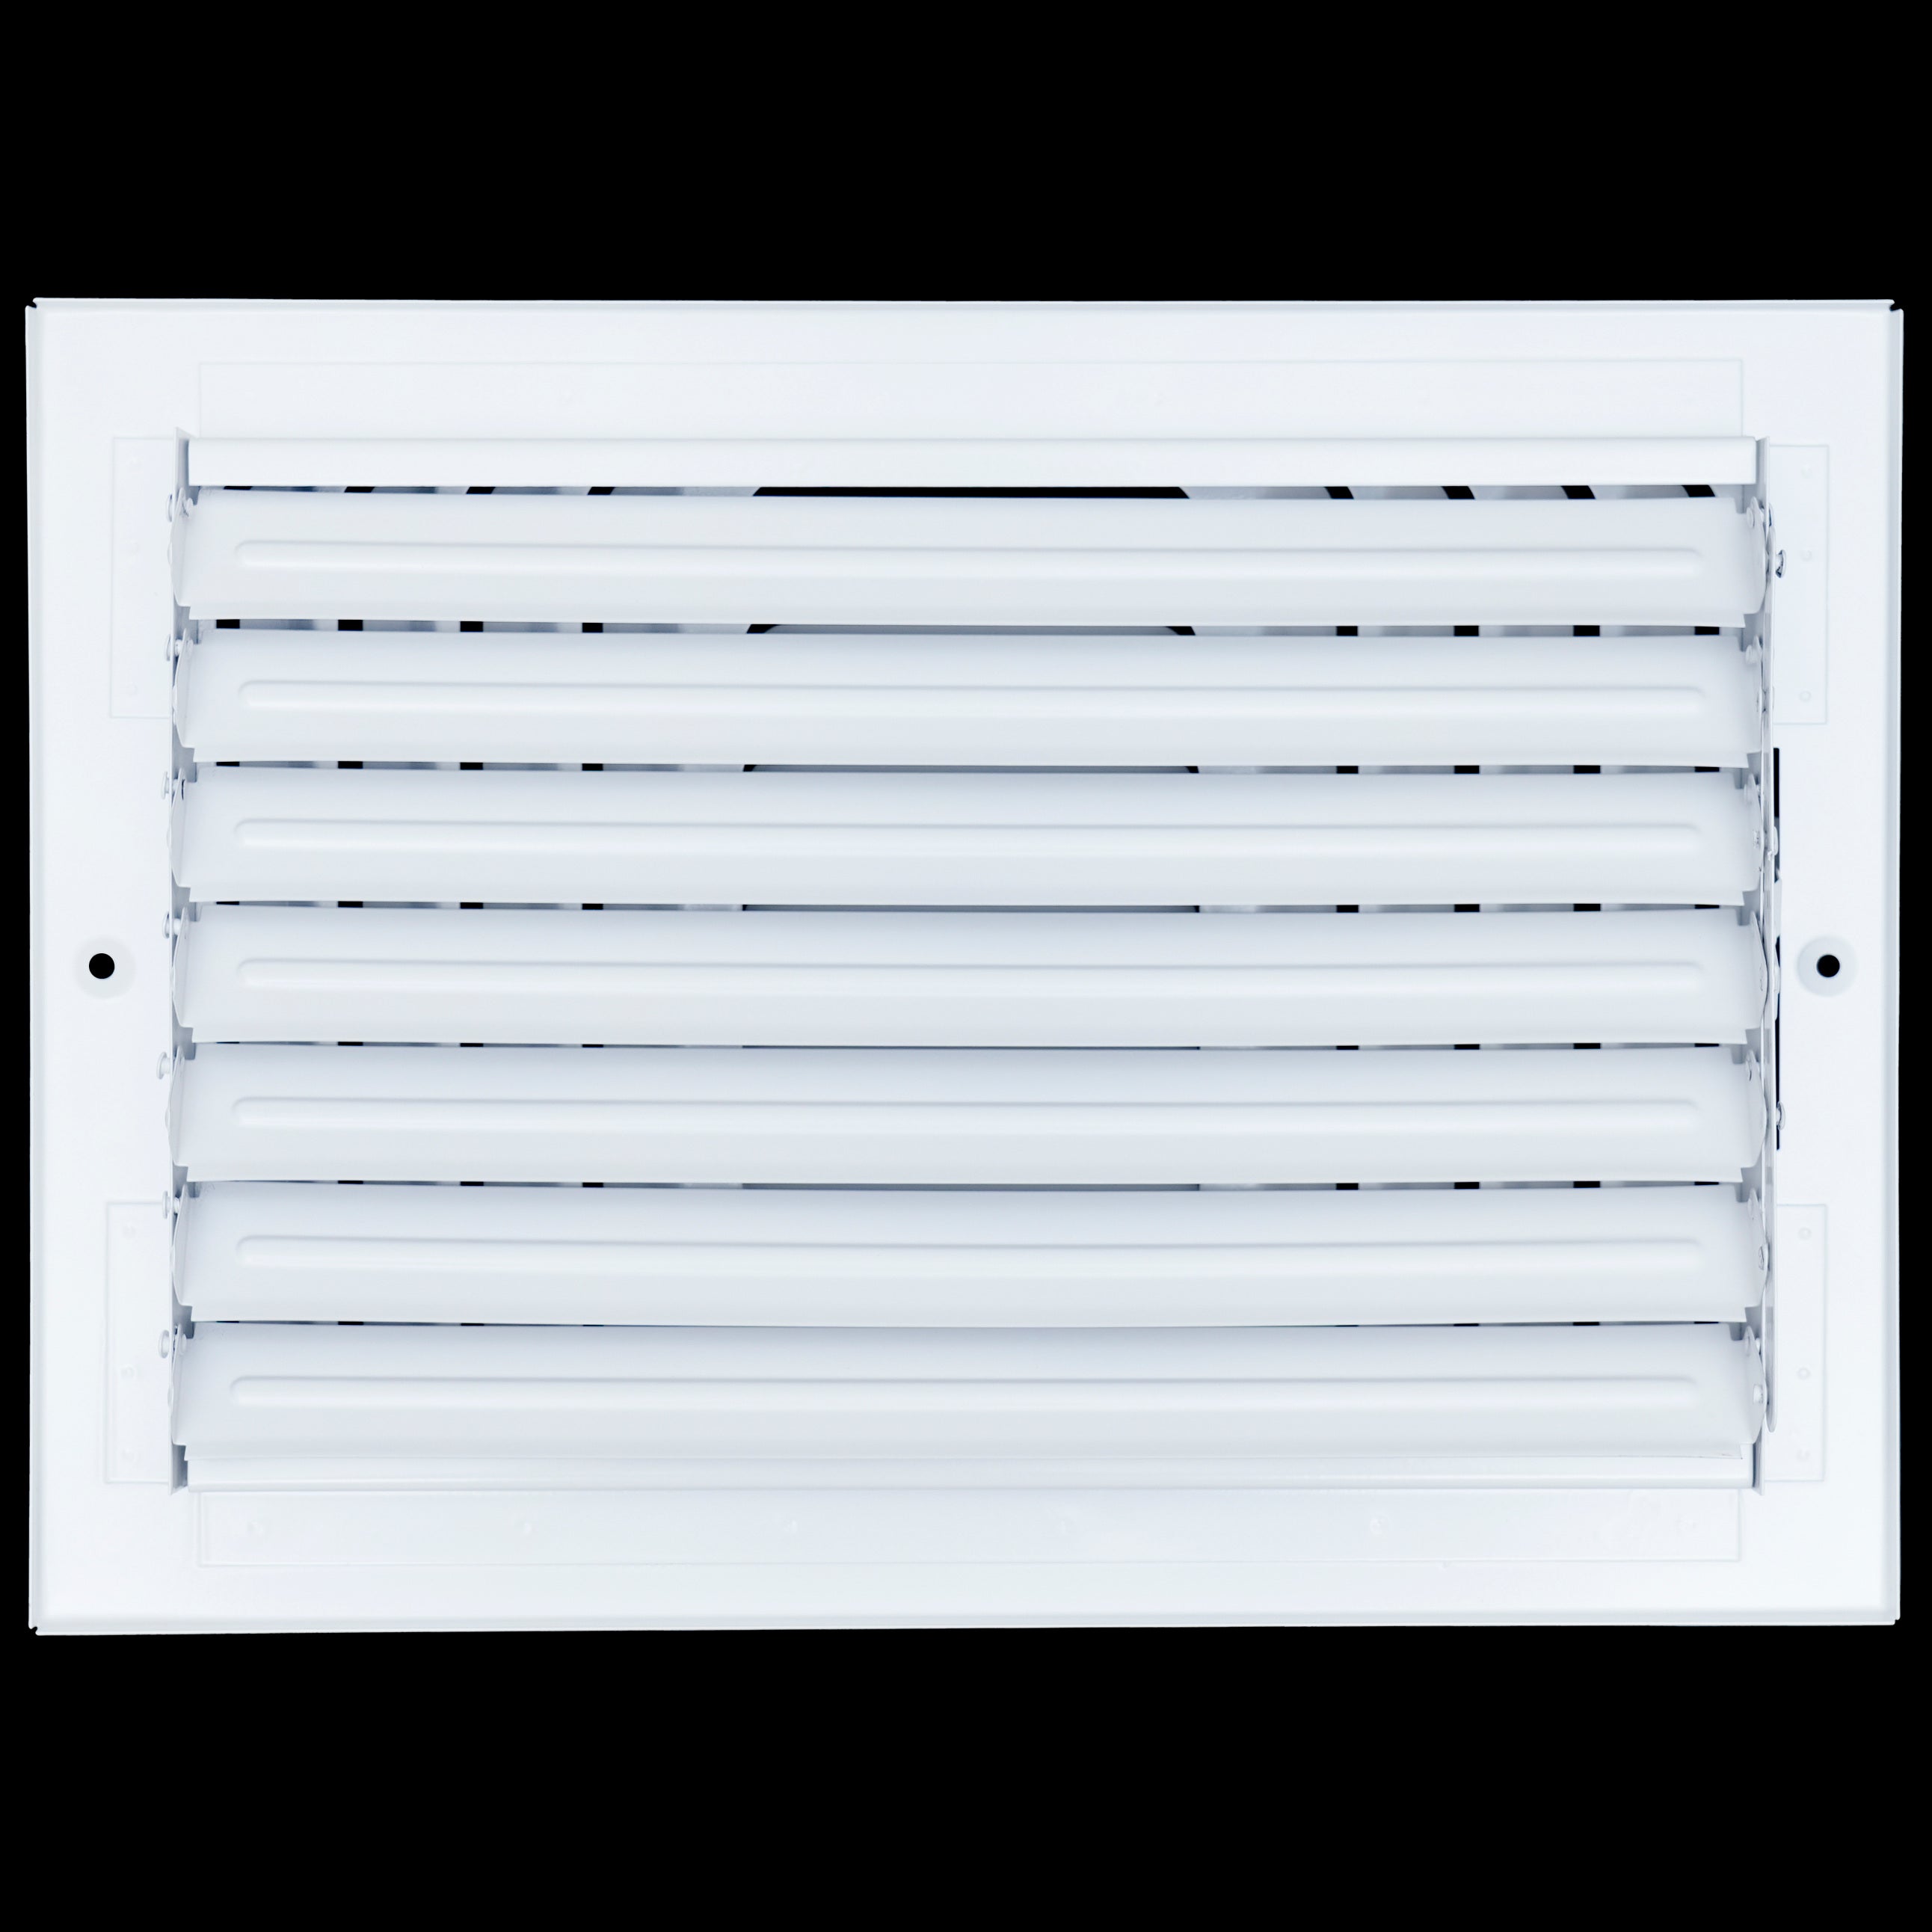 12"W x 8"H 3 WAY Fixed Curved Blade Air Supply Diffuser | Register Vent Cover Grill for Sidewall and Ceiling | White | Outer Dimensions: 13.75"W X 9.75"H